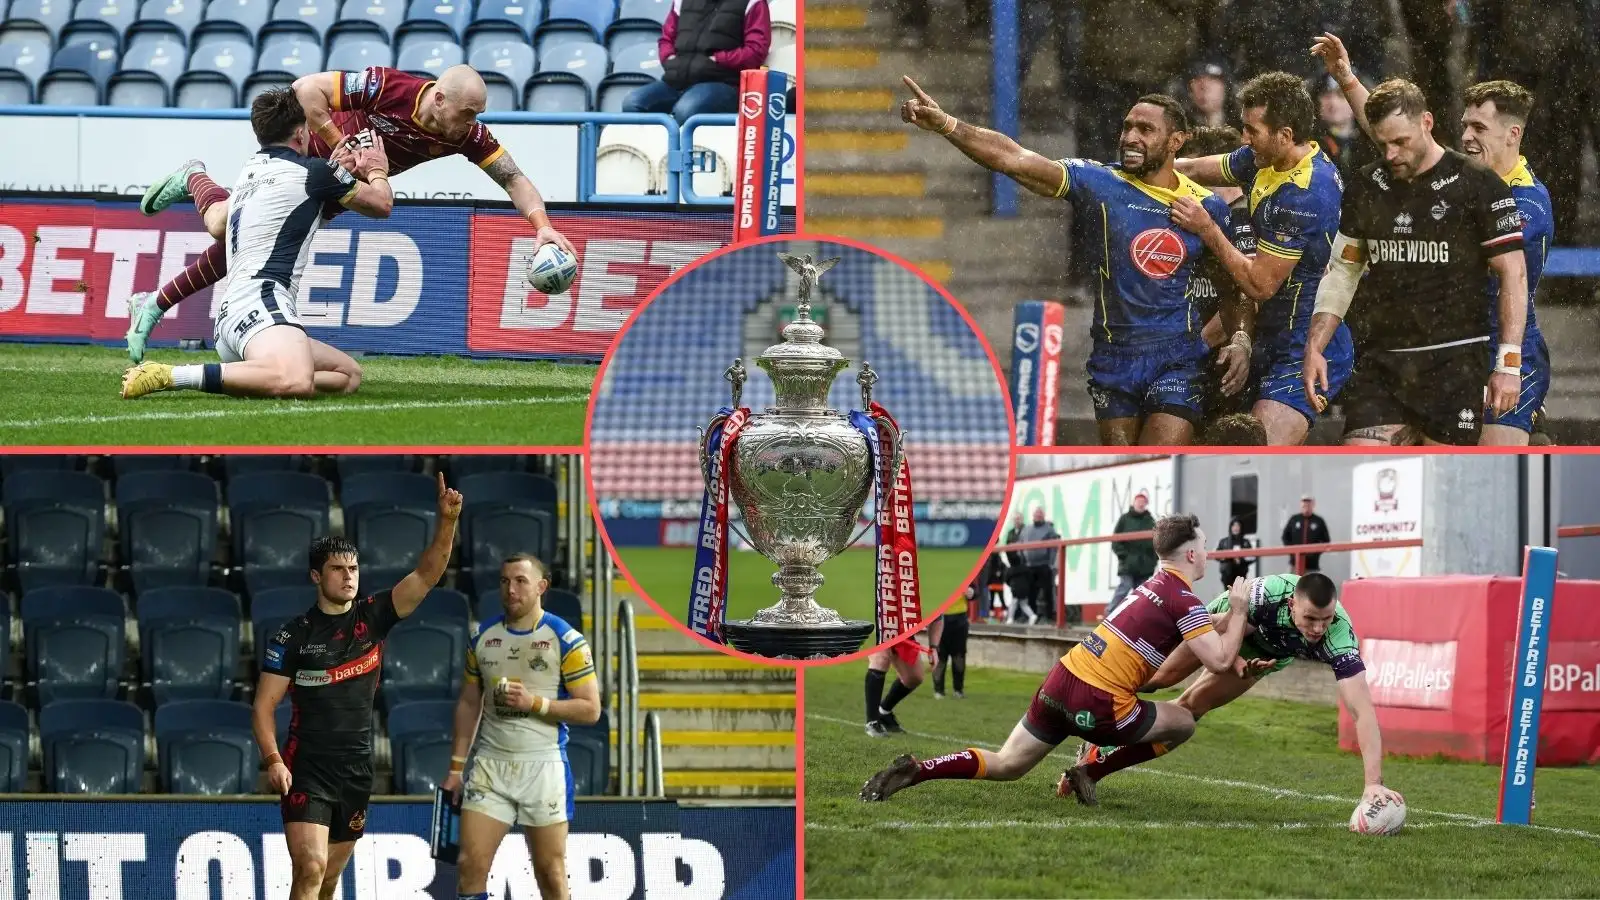 Challenge Cup quarter-finals: The 8 Super League clubs in Monday’s draw